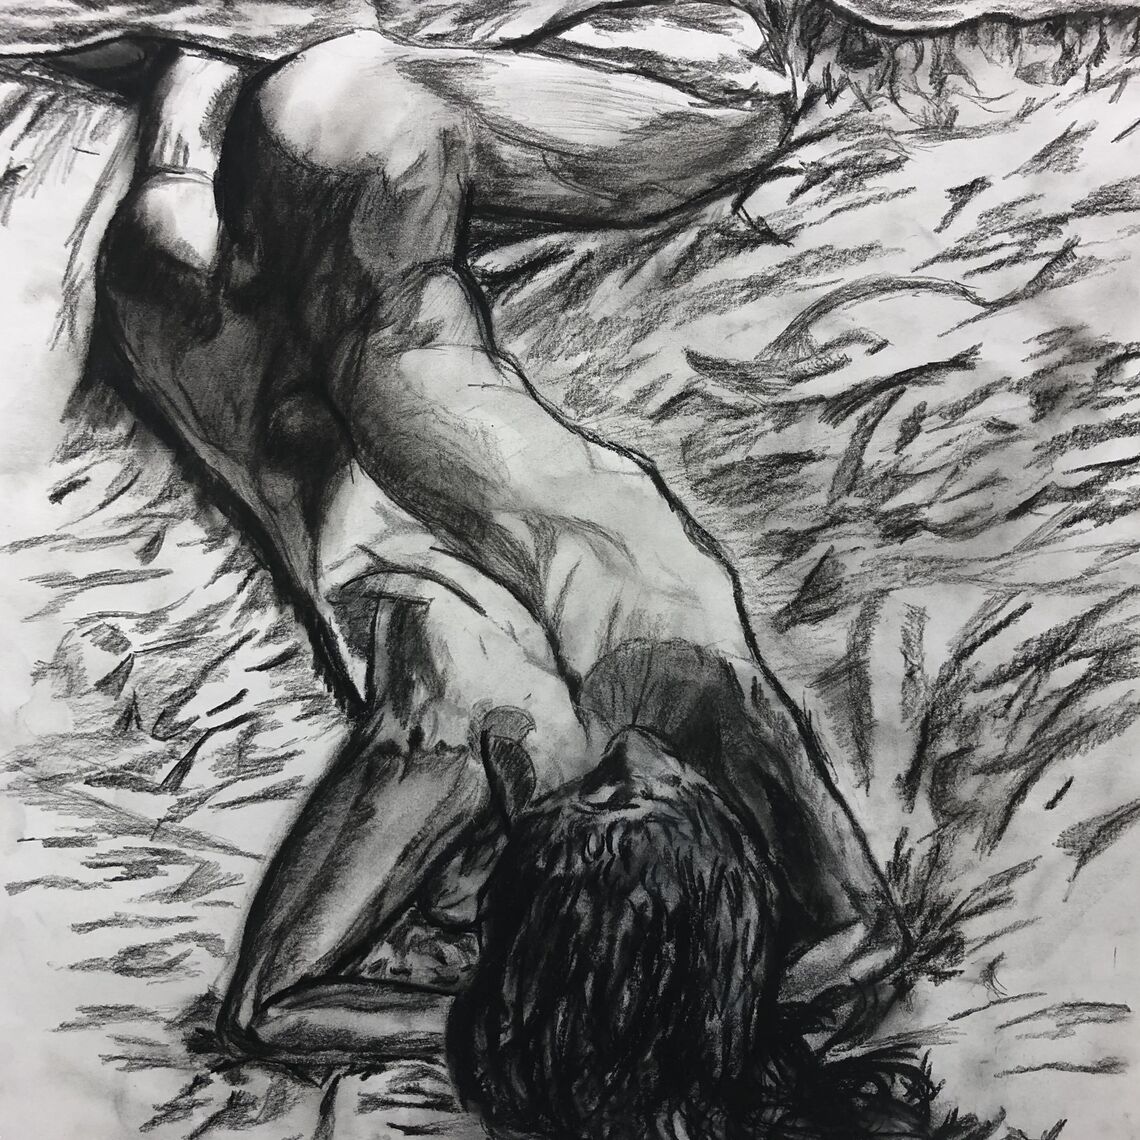 Charcoal illustrations by Jevelson Jean ’21